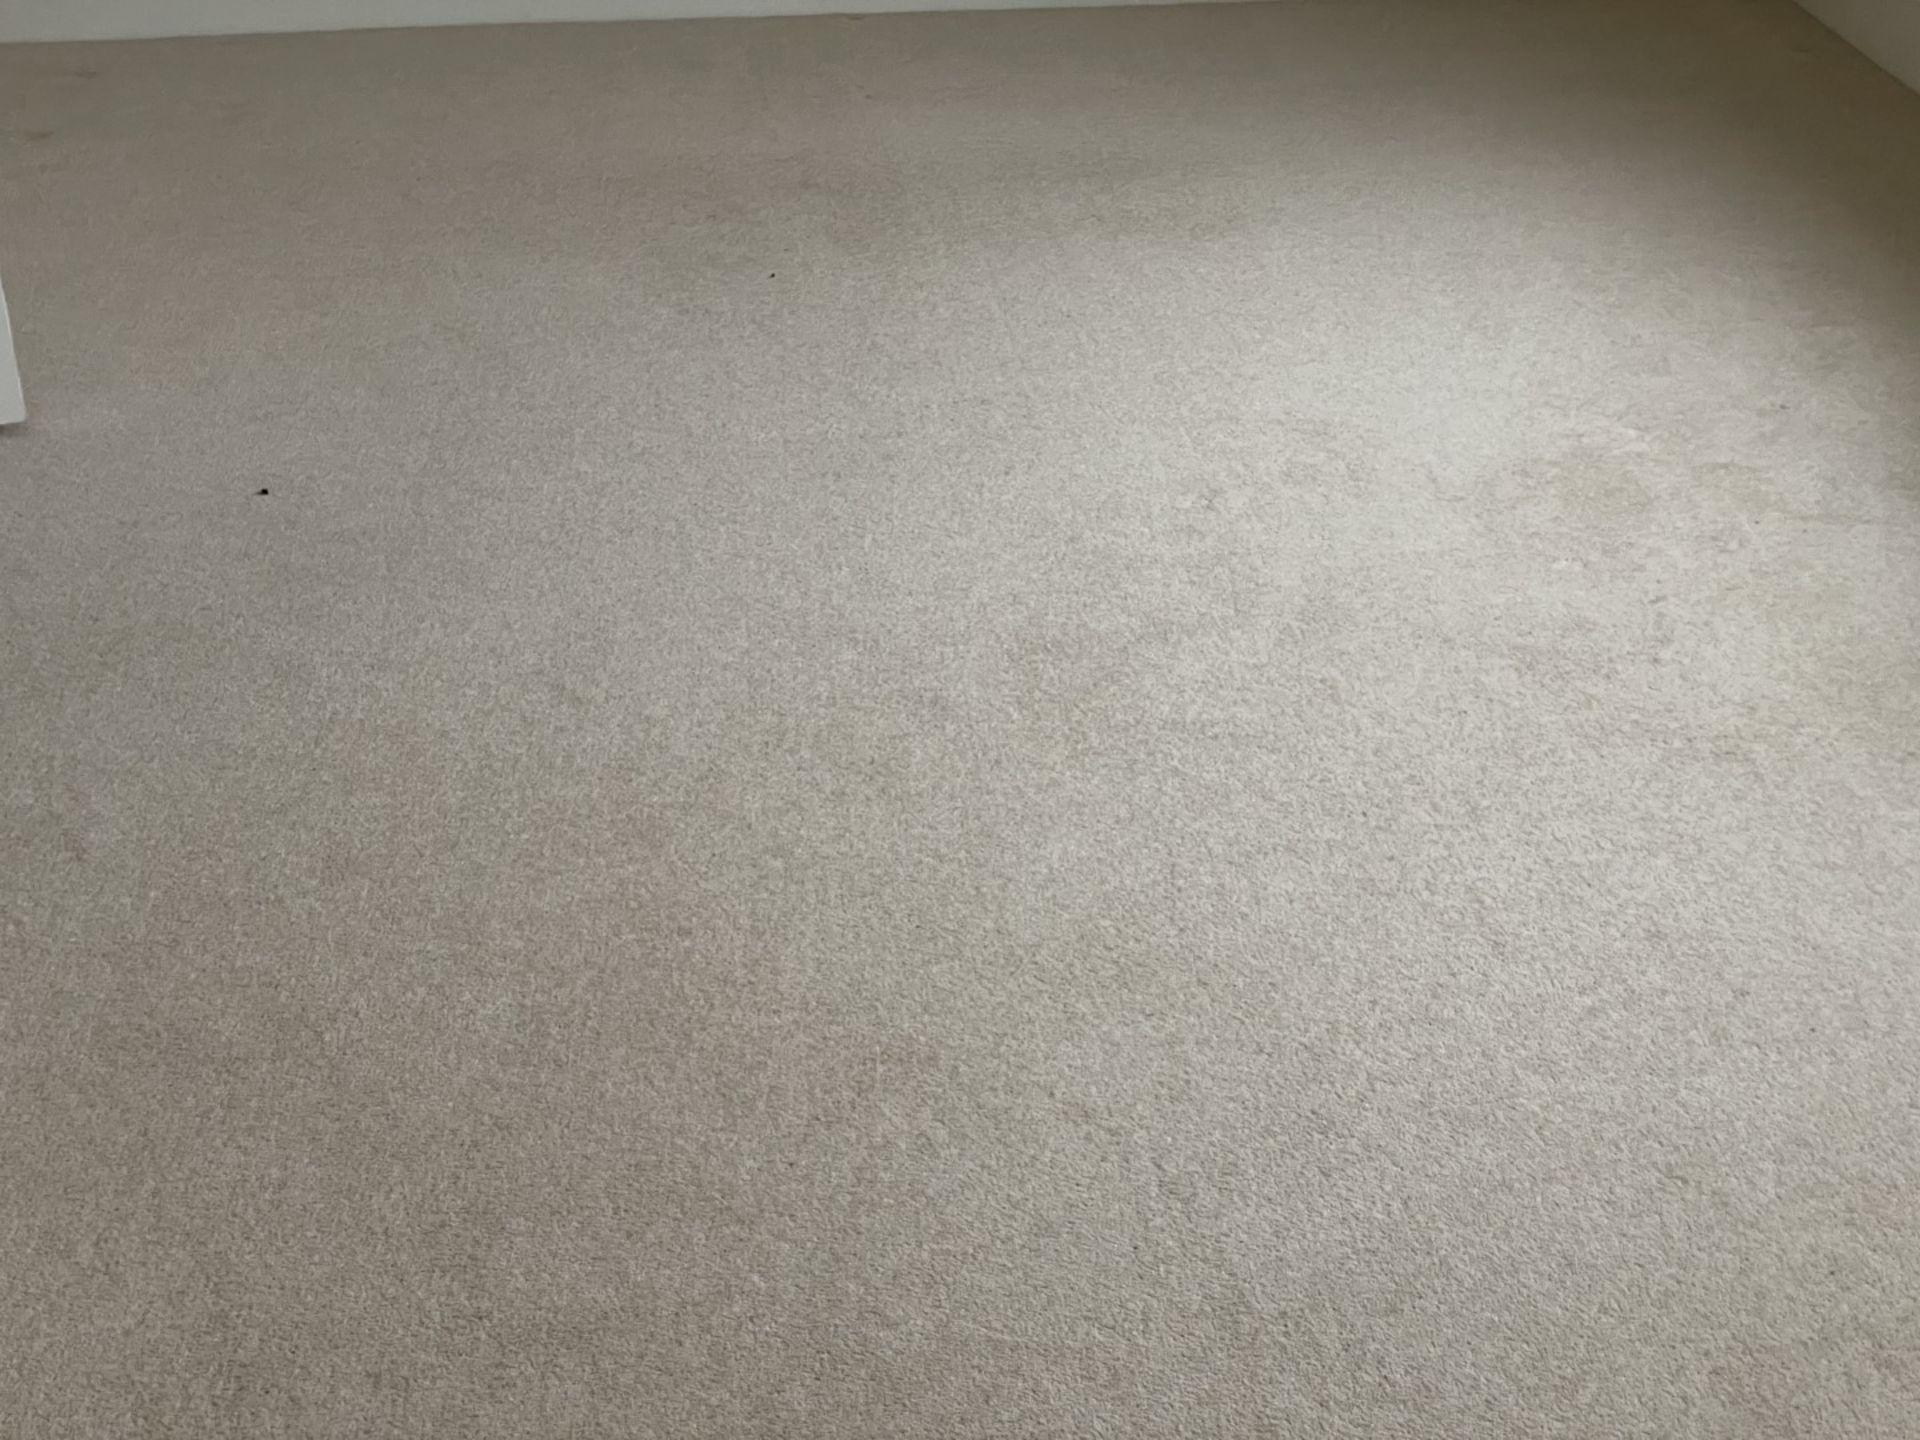 1 x Luxury Wool Bedroom + Dressing Room Carpets in a Neutral Tone with Premium Underlay - Image 10 of 11